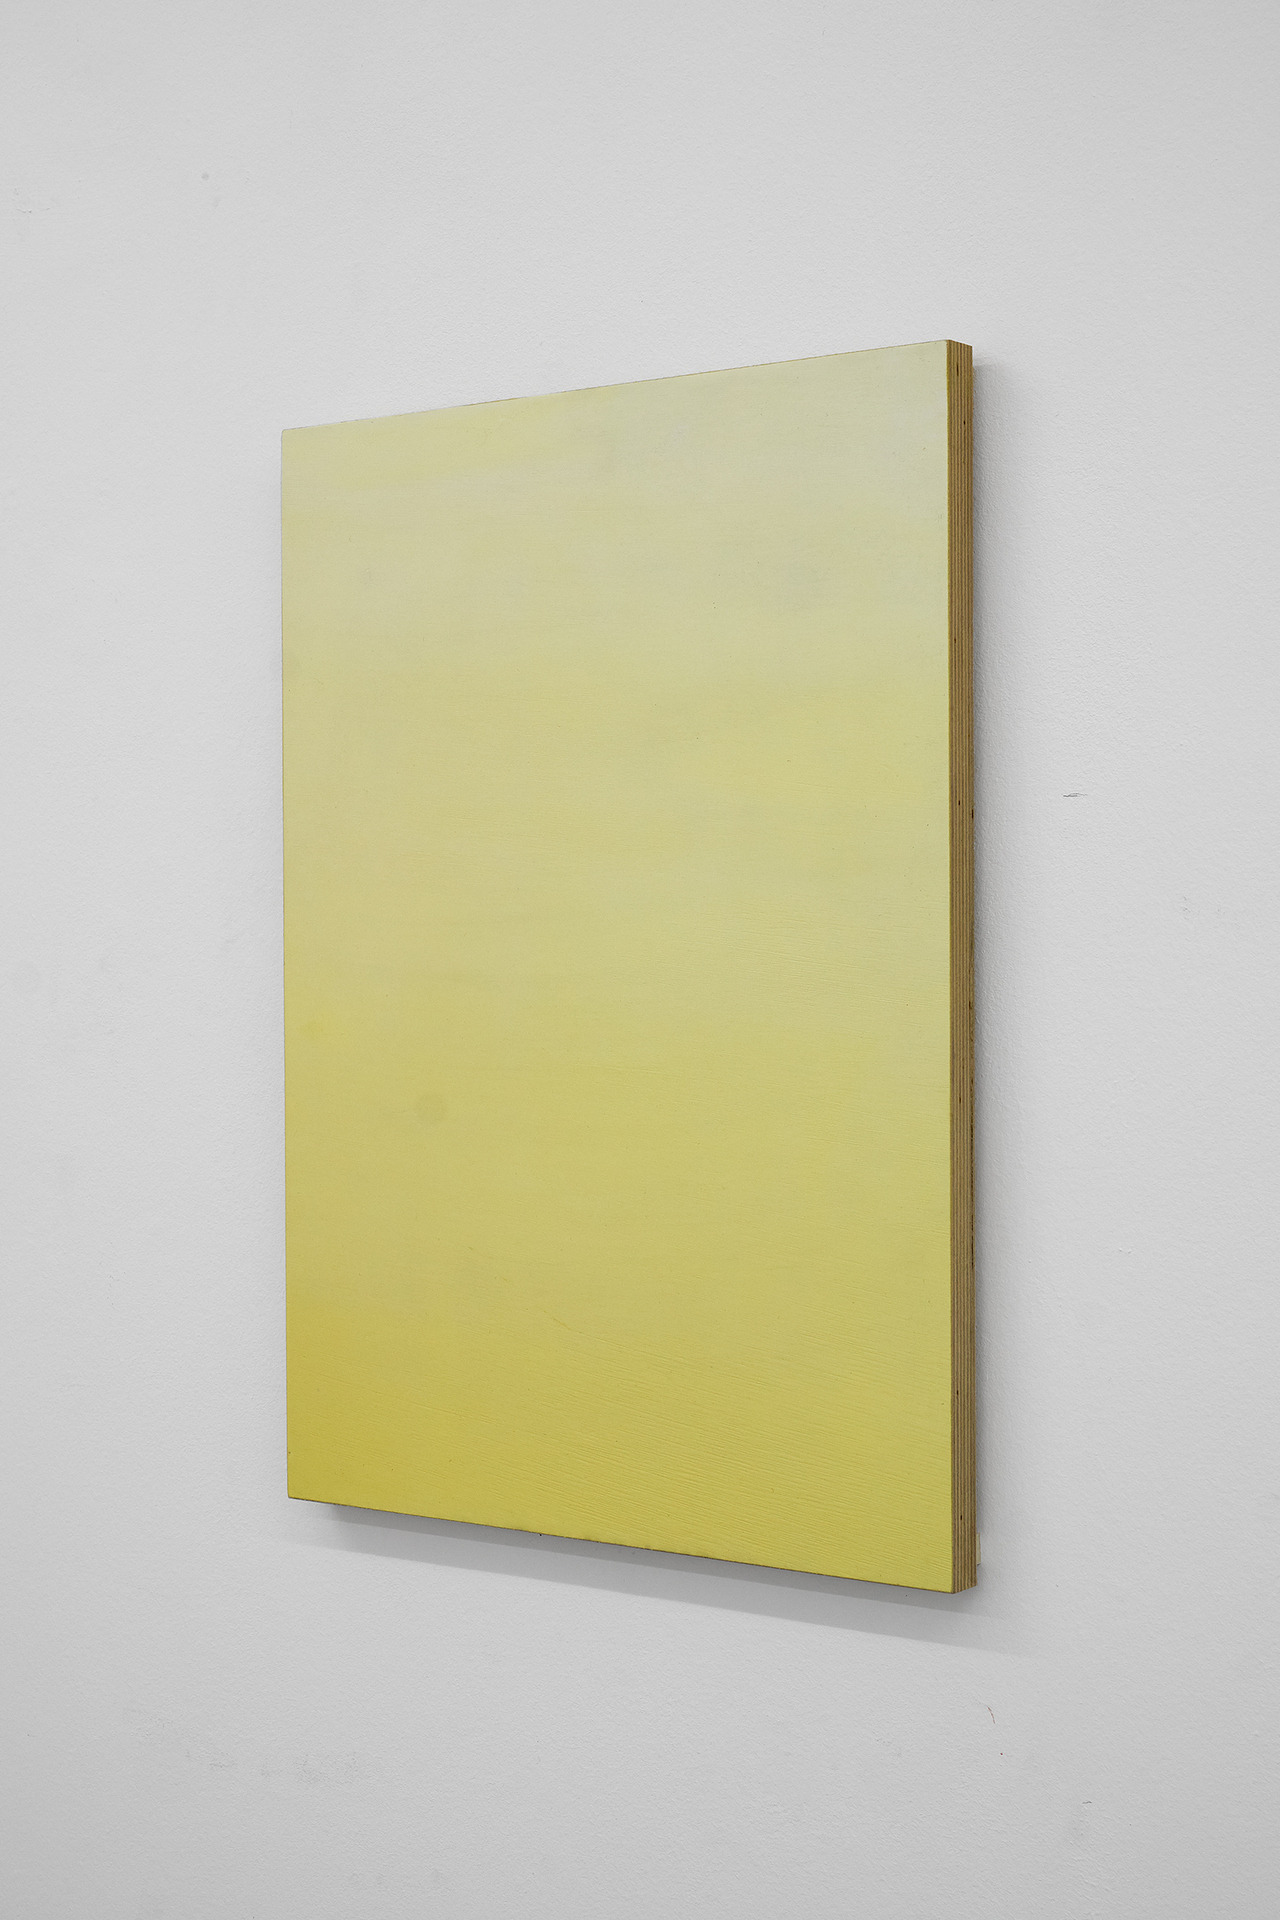 Gabrie Stoian, Untitled, 2019, oil on canvas mounted on wood, 40x60cm.